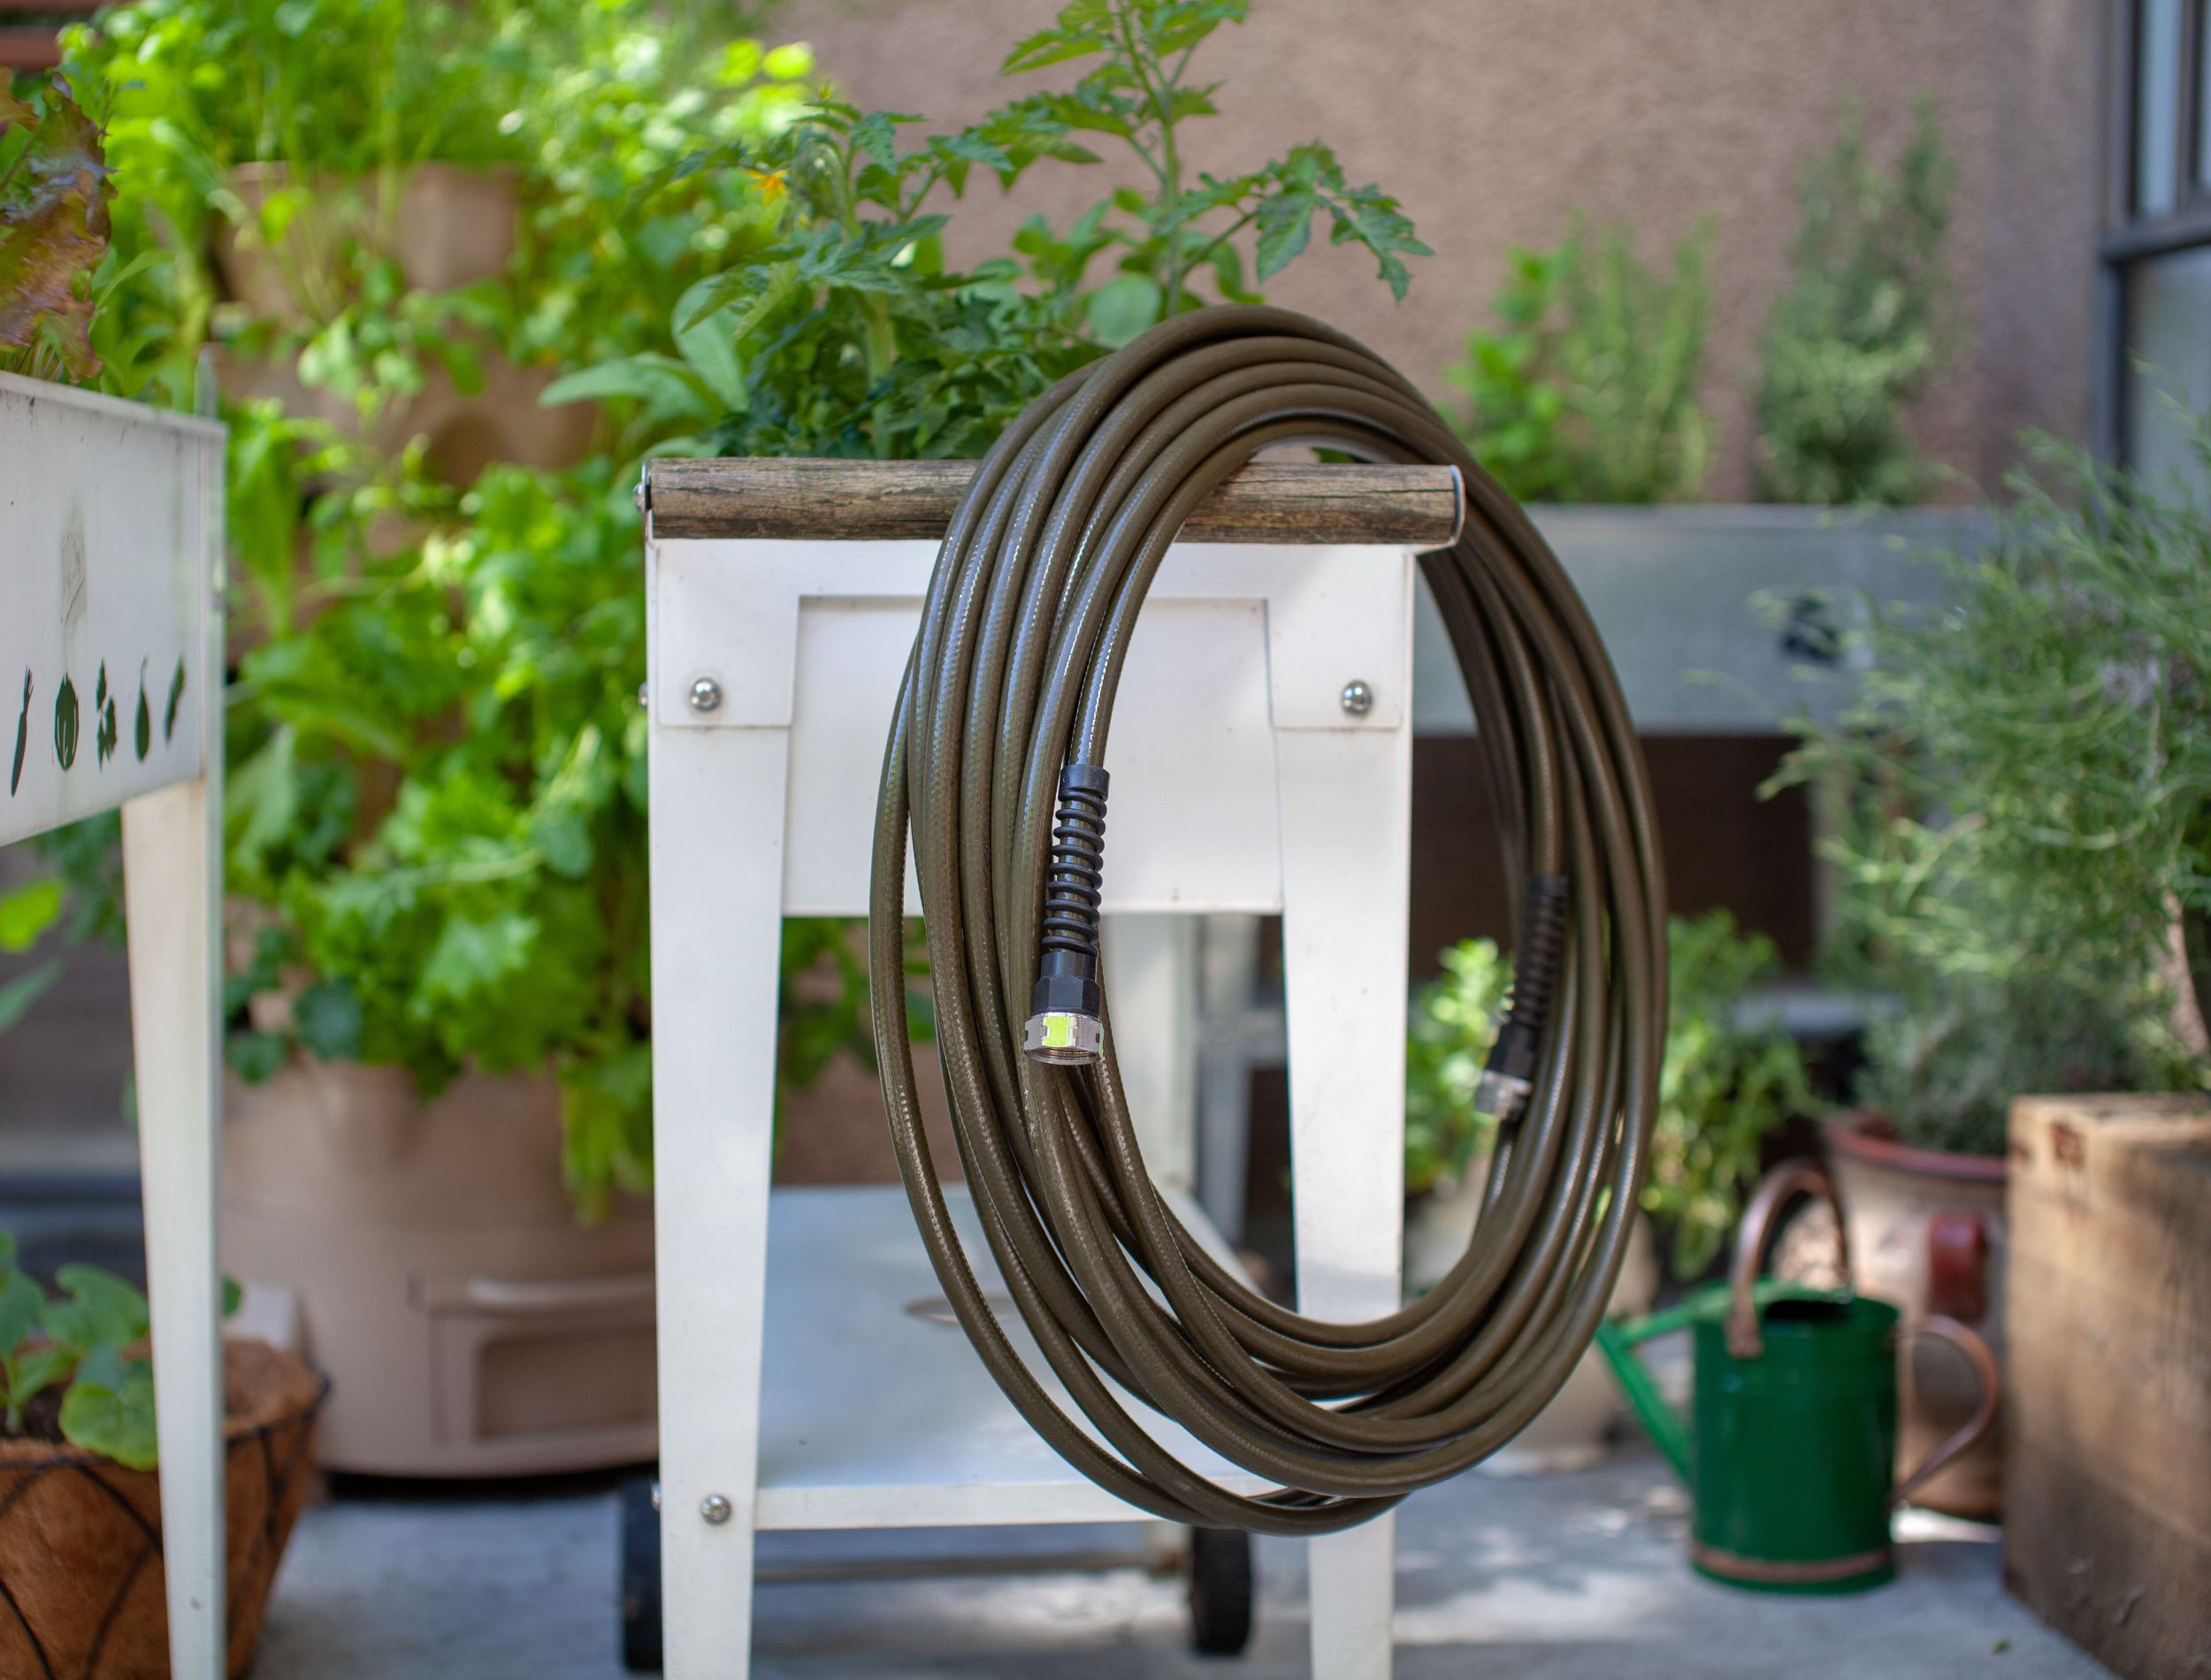 Prime Day Exclusive: Save 60% on the Best-Selling Garden Hose for